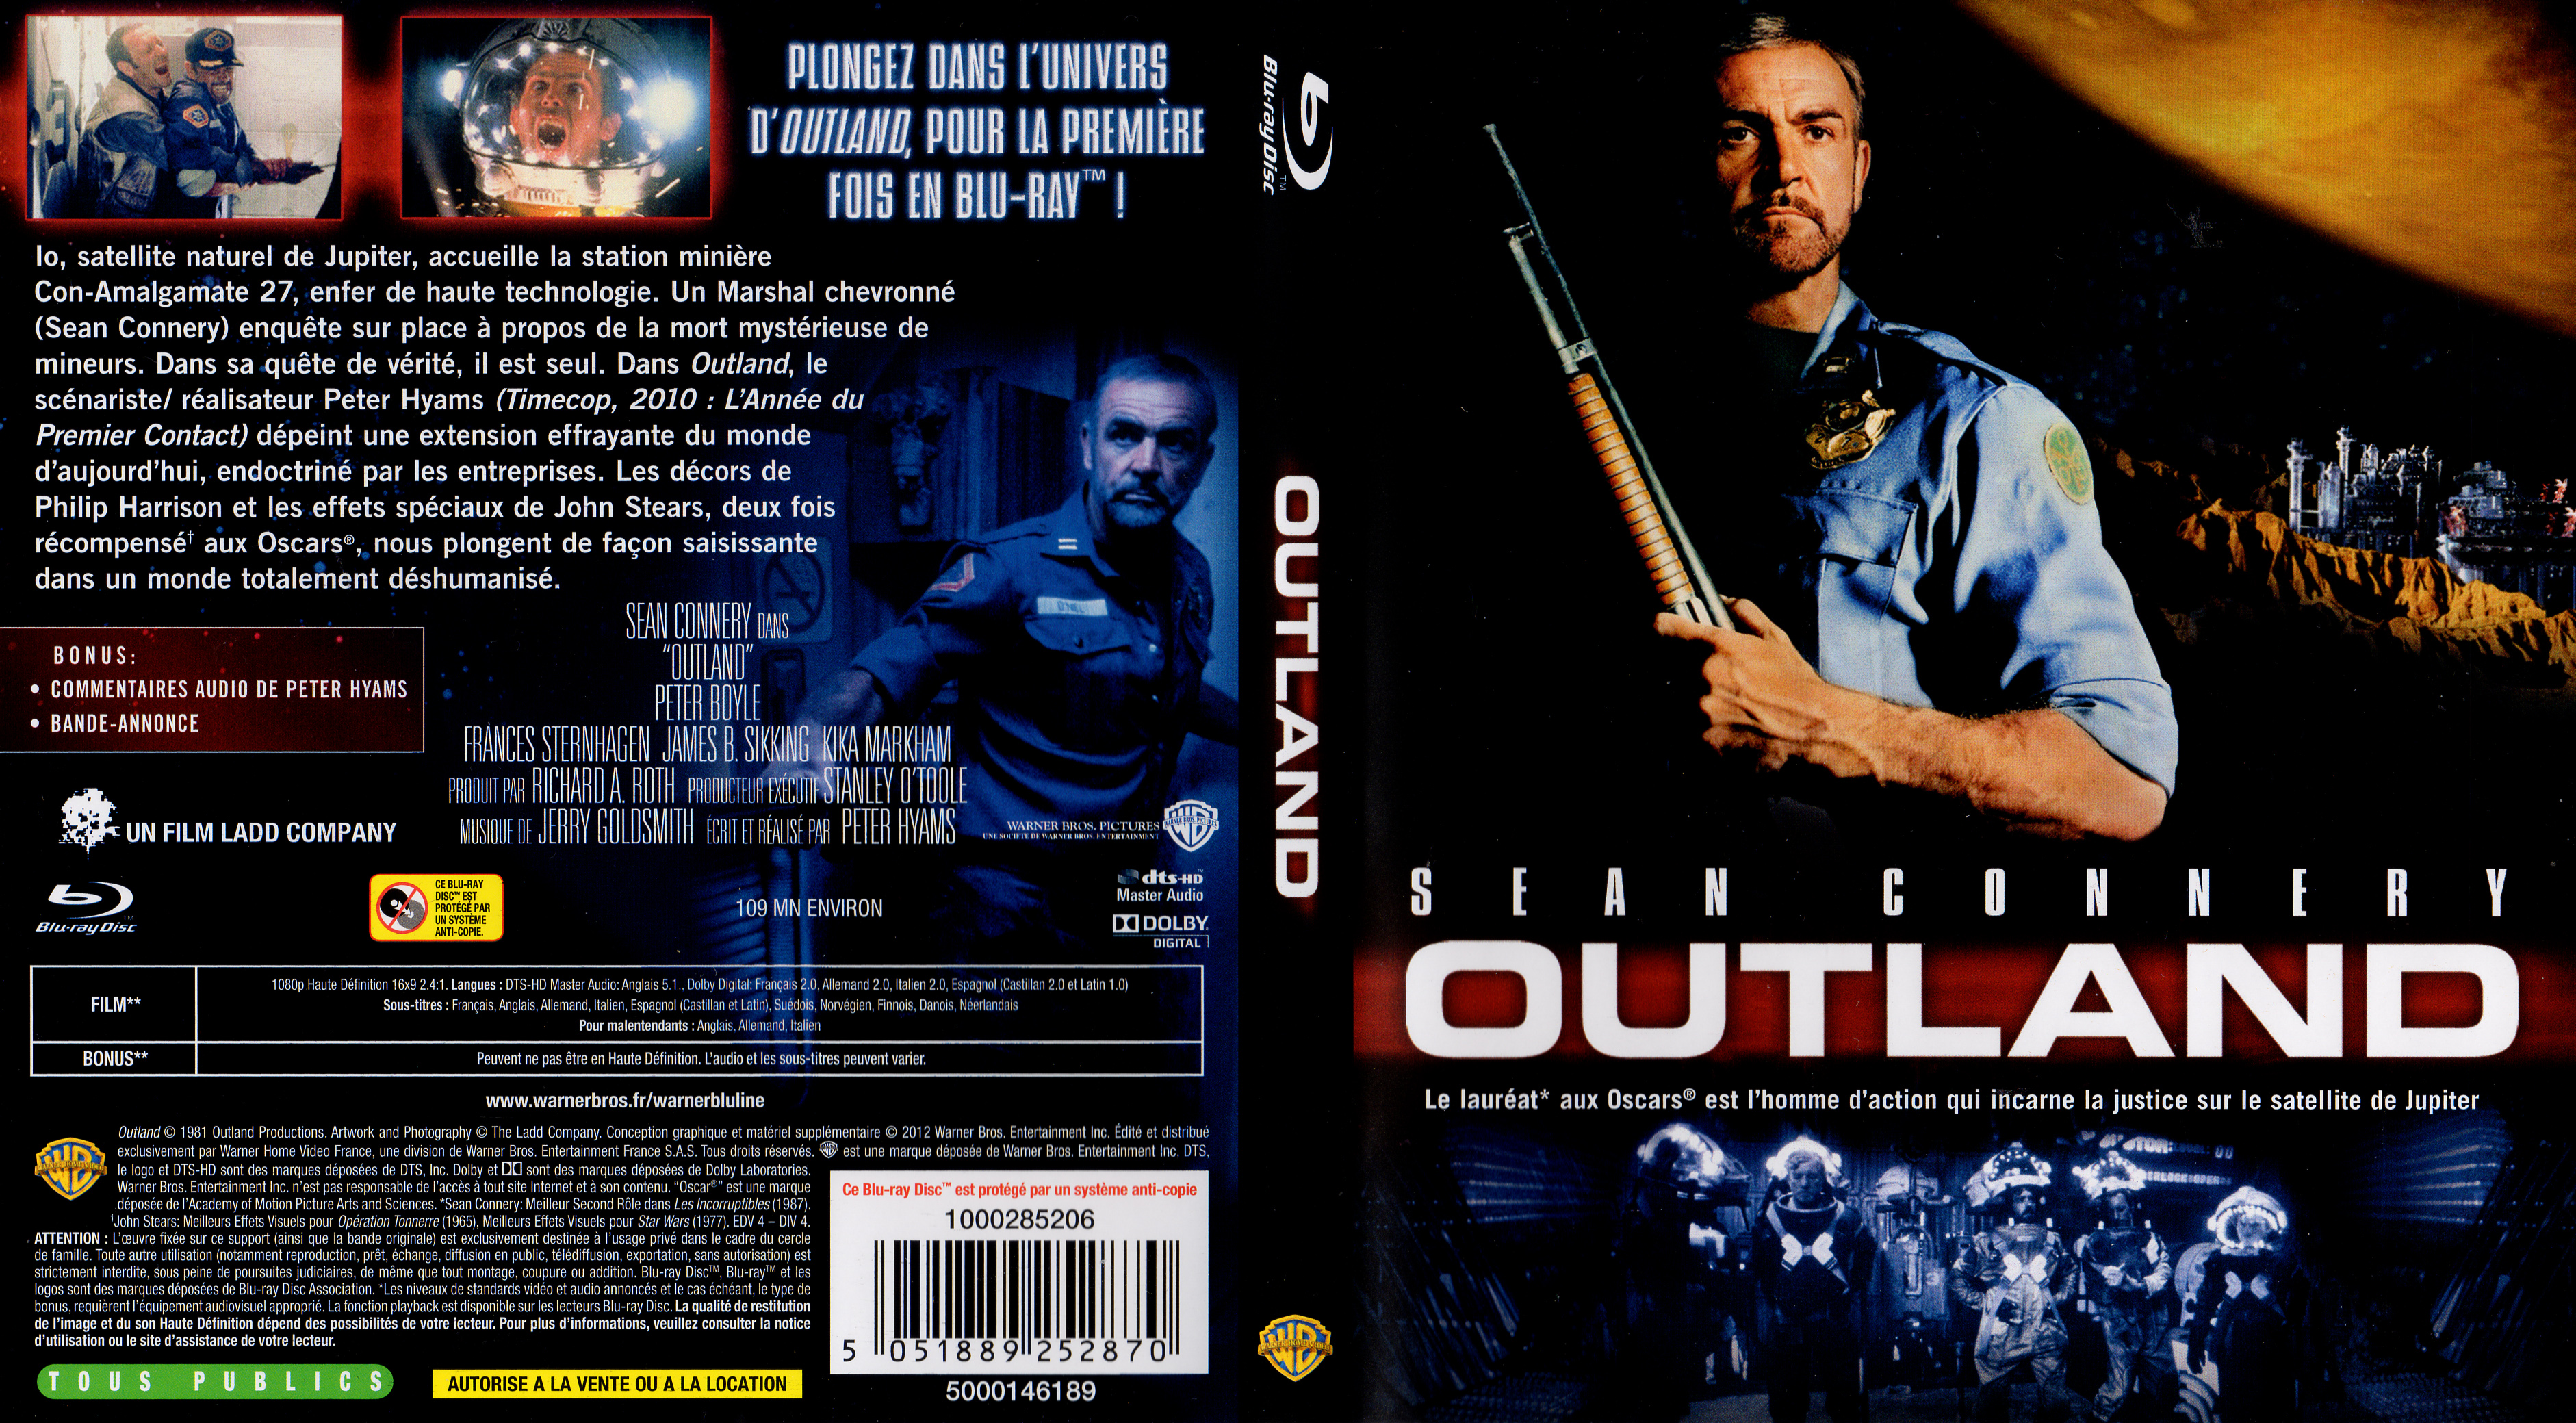 Jaquette DVD Outland (BLU-RAY)